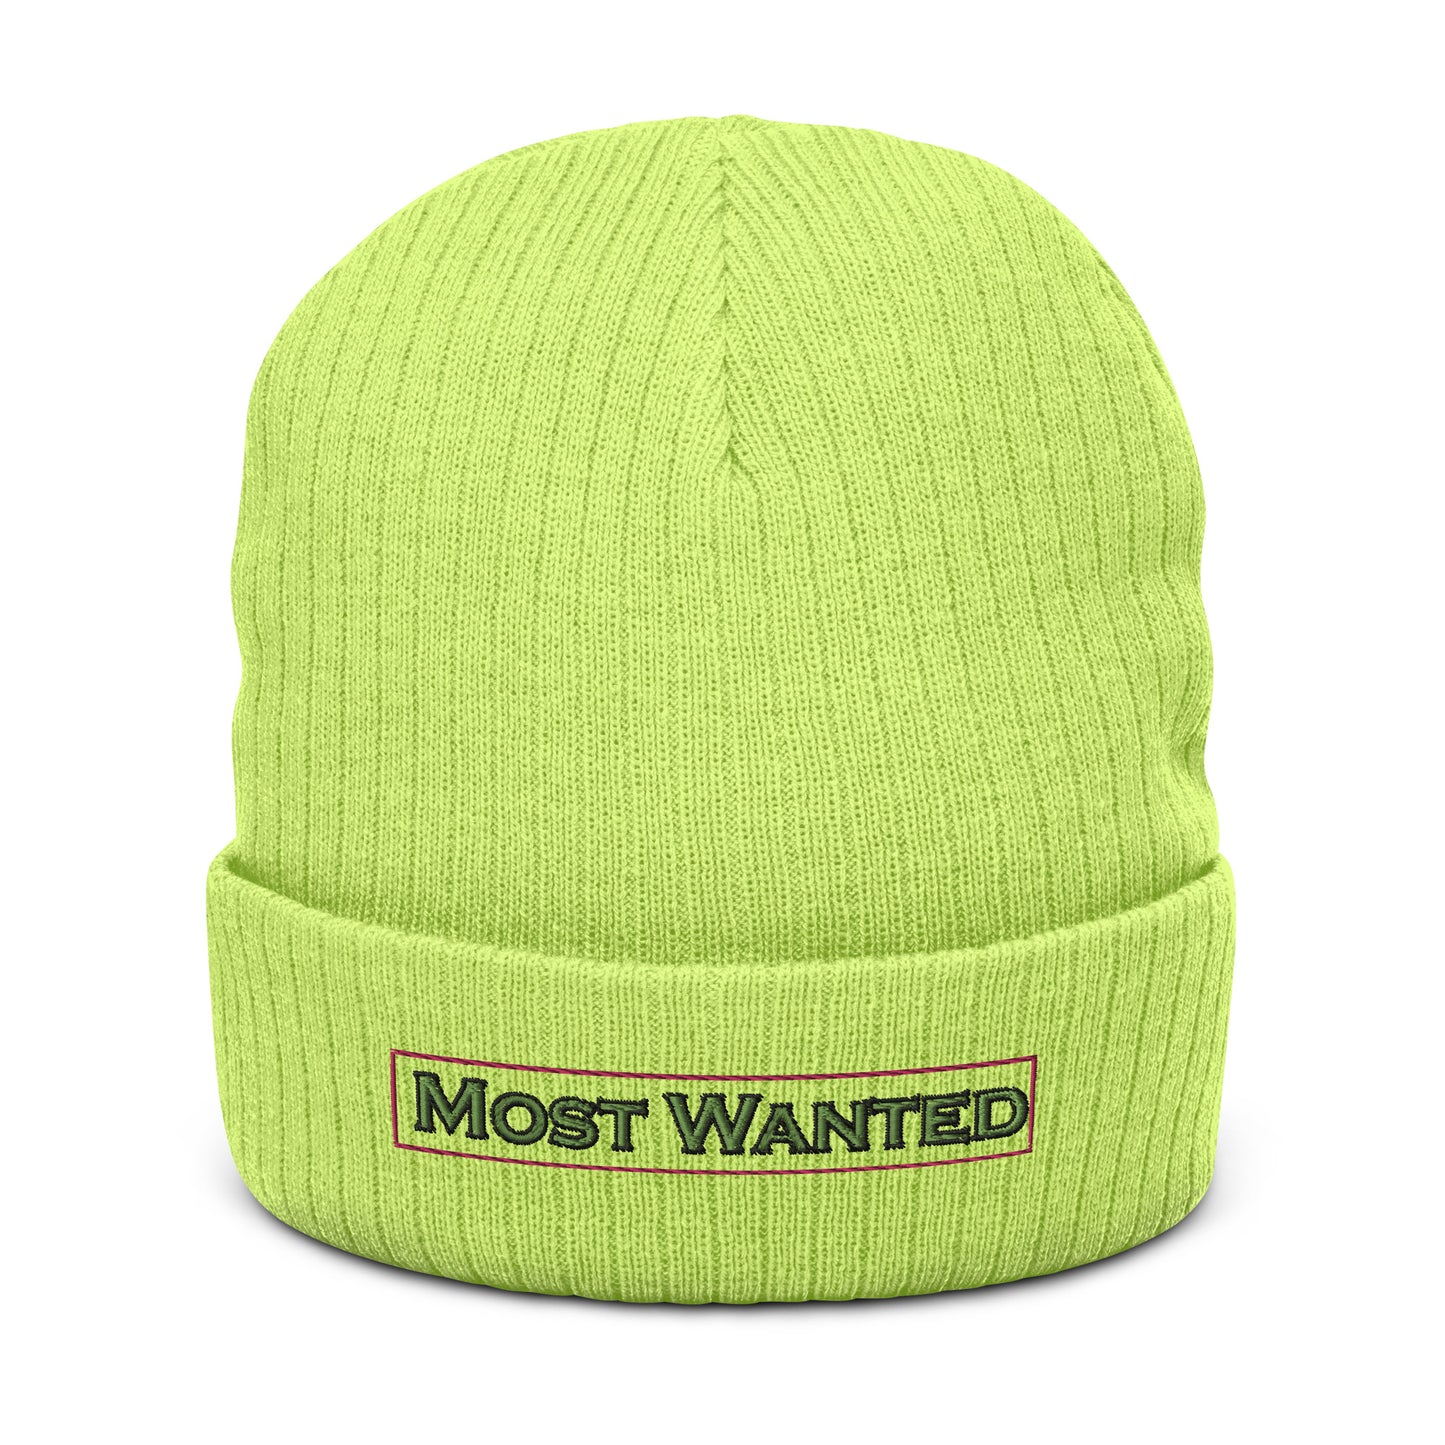 Ribbed knit beanie (Most Wanted)